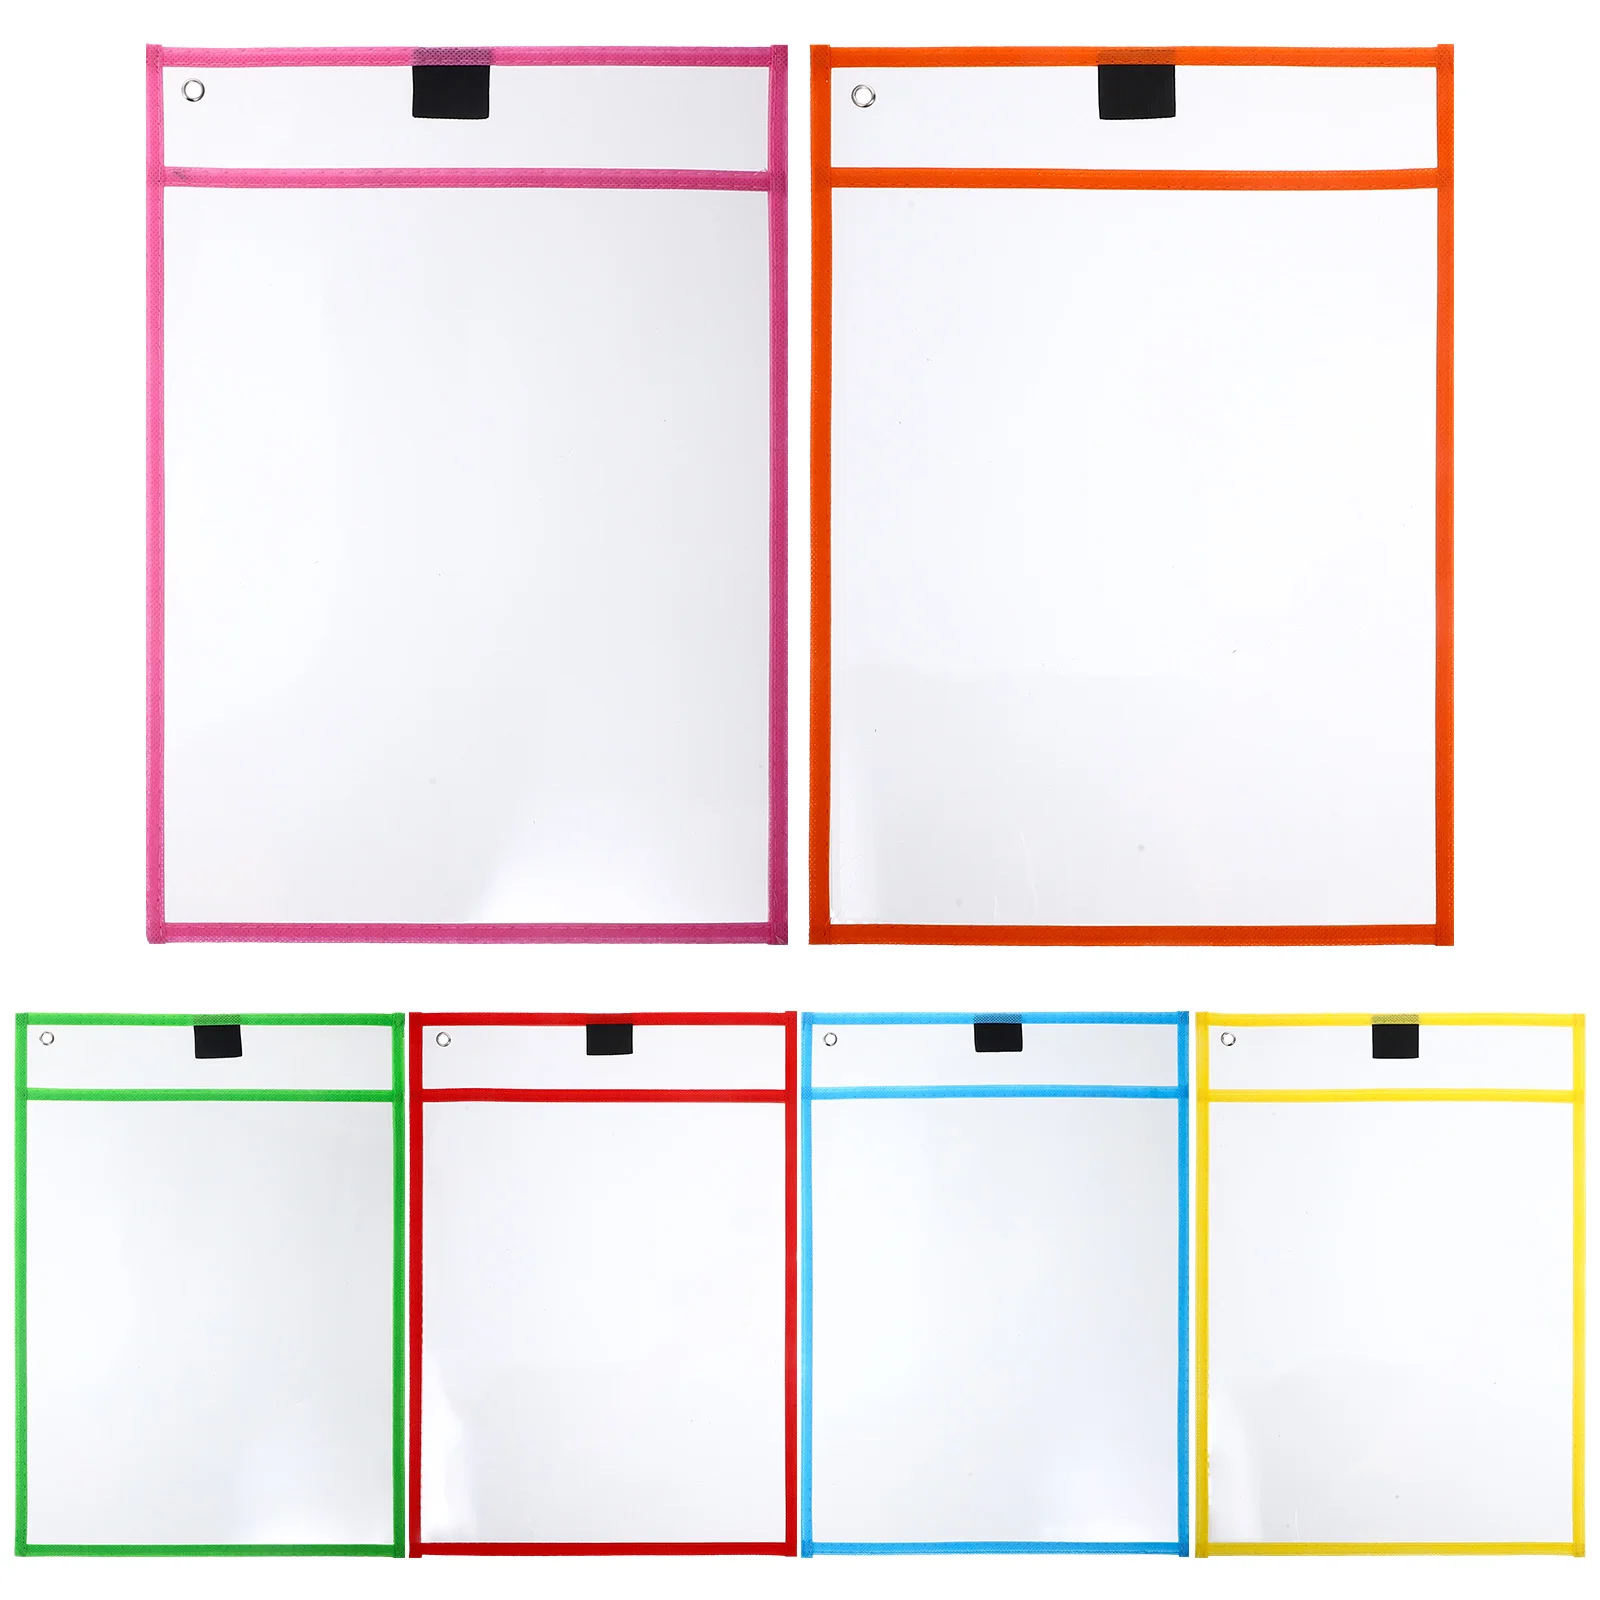 

Envelopes Pocket Sleeves for Teachers - 6 Pack, Reusable Plastic, Assorted Colors, 13.8 X 9.8 Inch